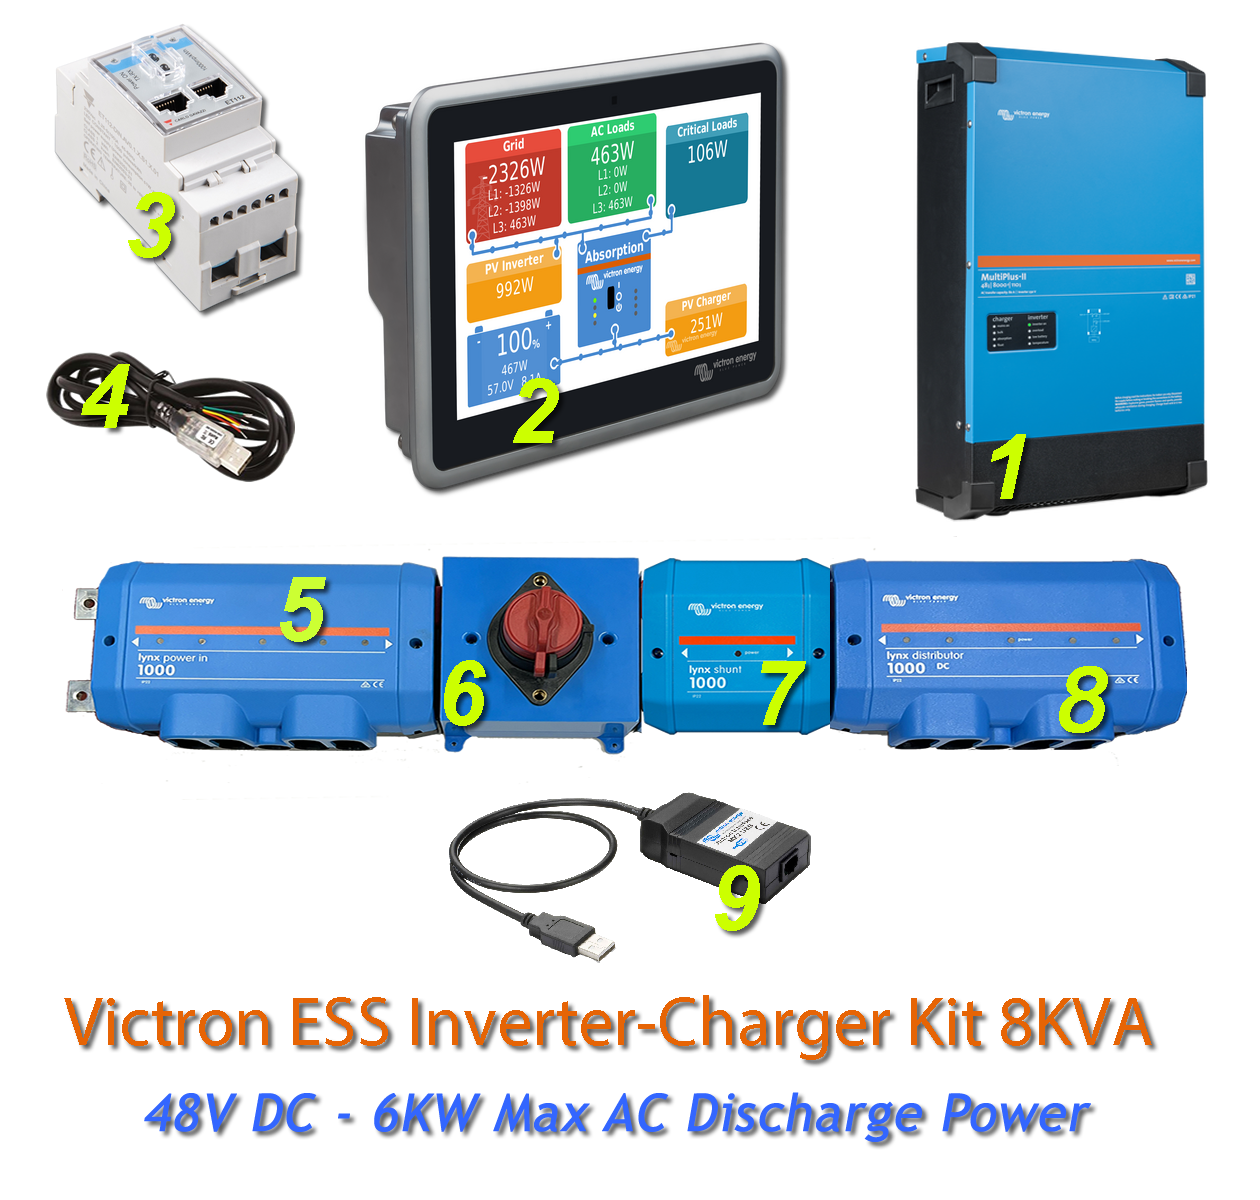 Victron Energy Multiplus II ESS Kit 48V DC - 6KW Max AC Discharge Power 110A Charging with Lynx System